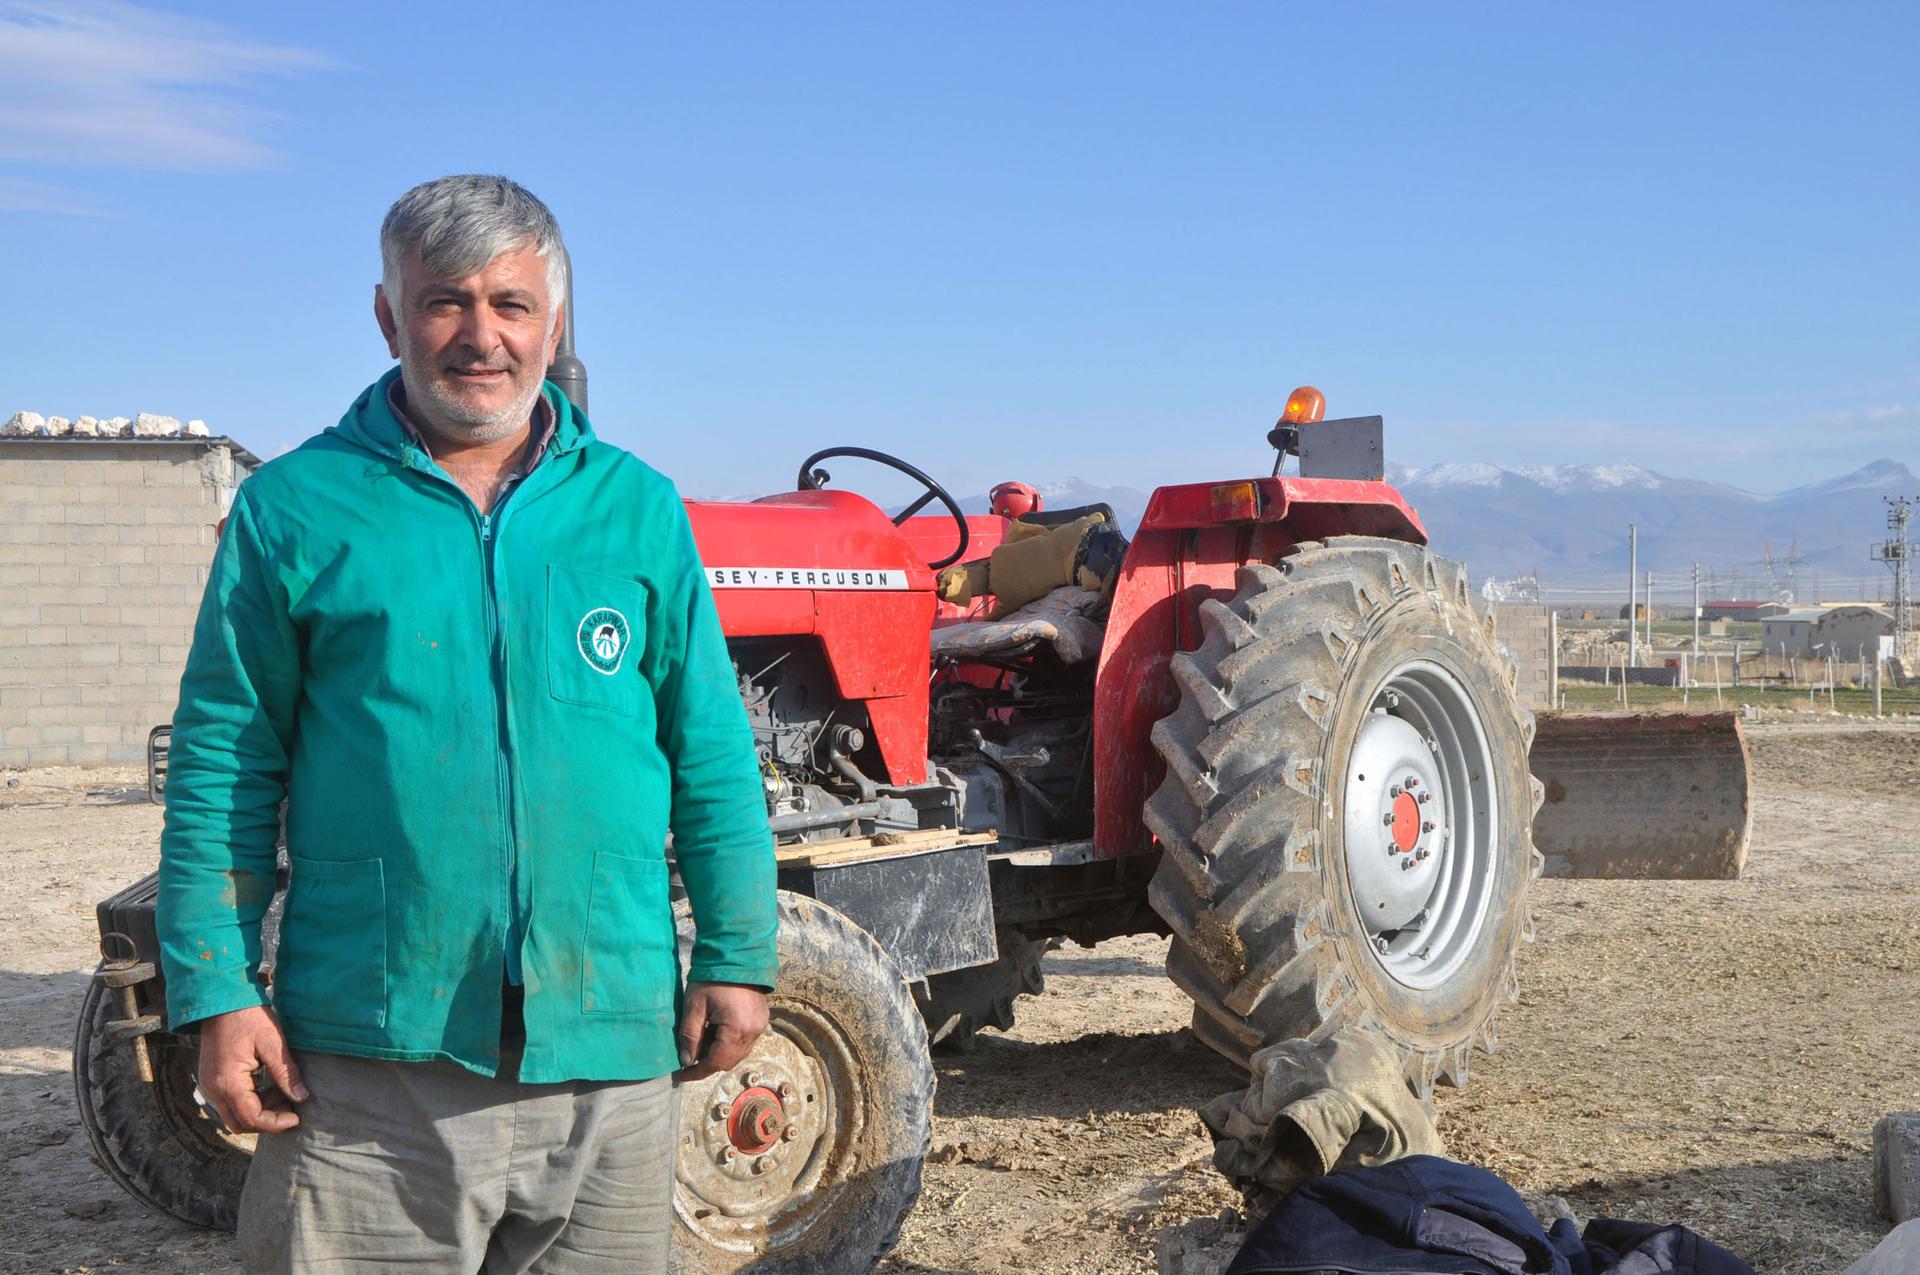 Mustafa Baldanoğlu takes a break from operating a tractor at his family’s dairy farm.